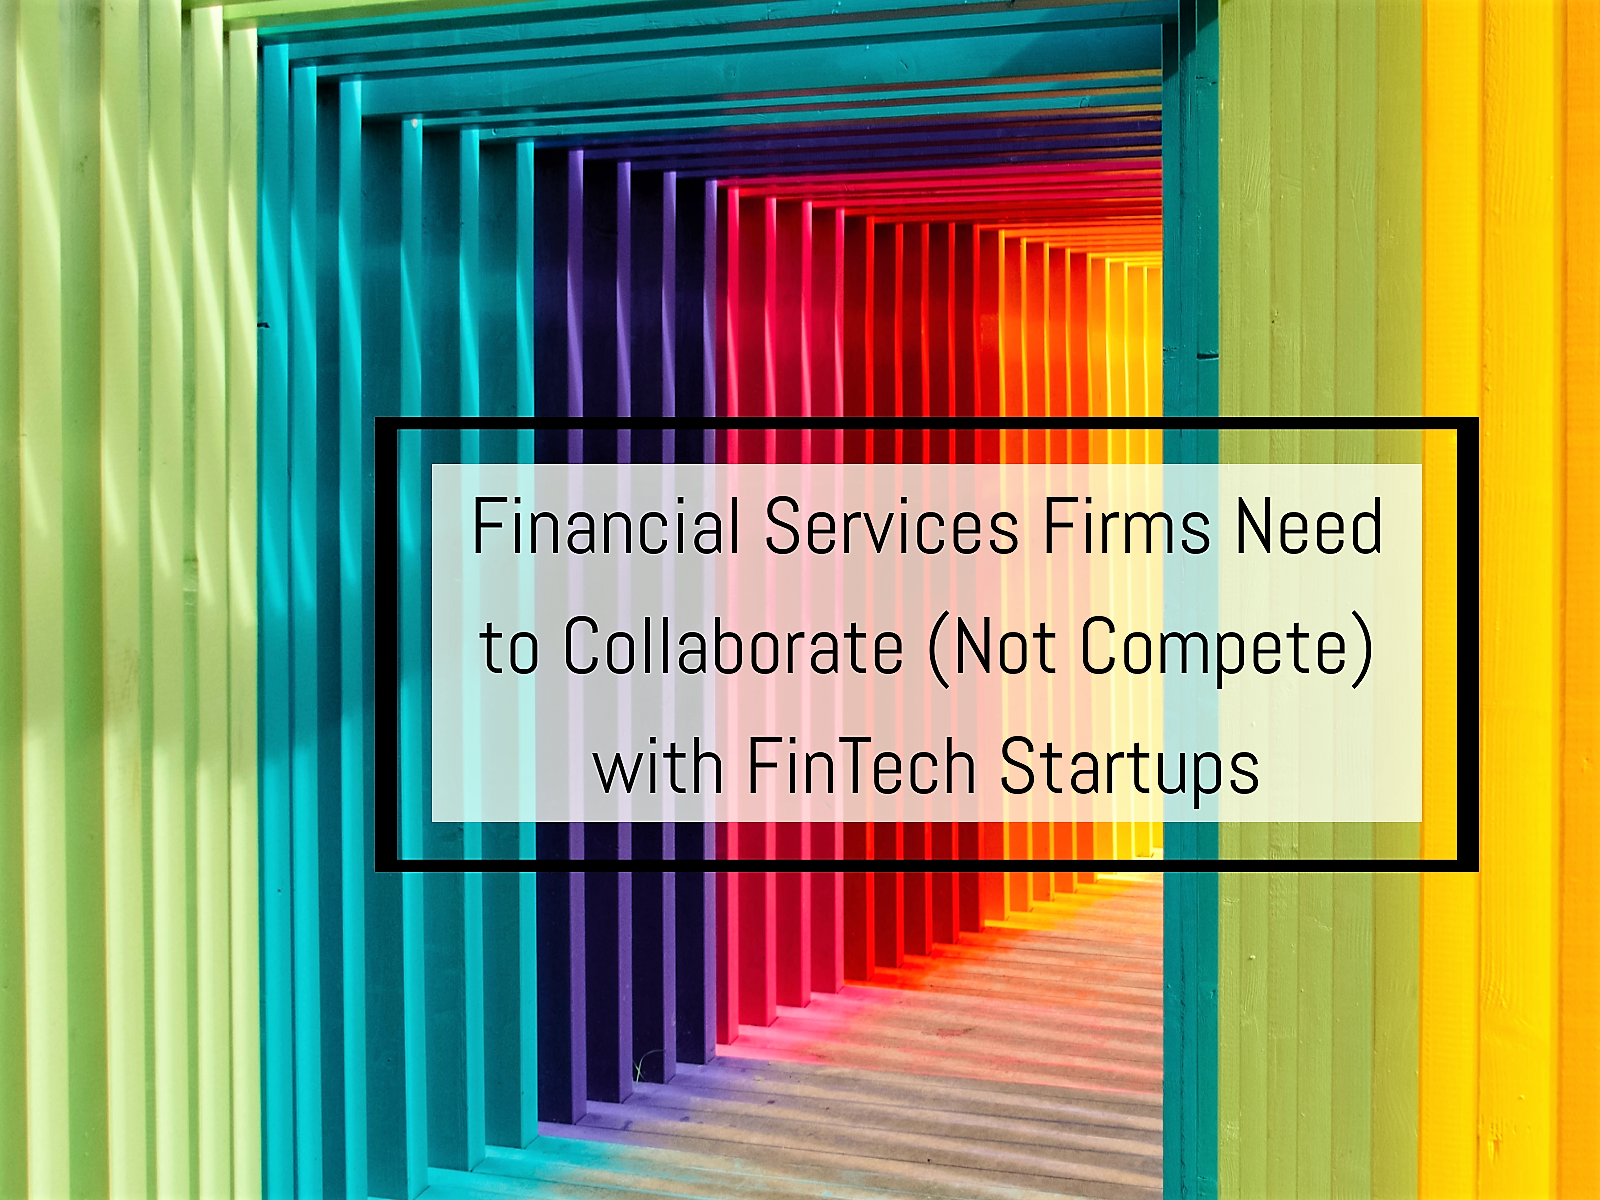 Here’s why Banks Need to Collaborate (and Not Compete) with FinTech Startups